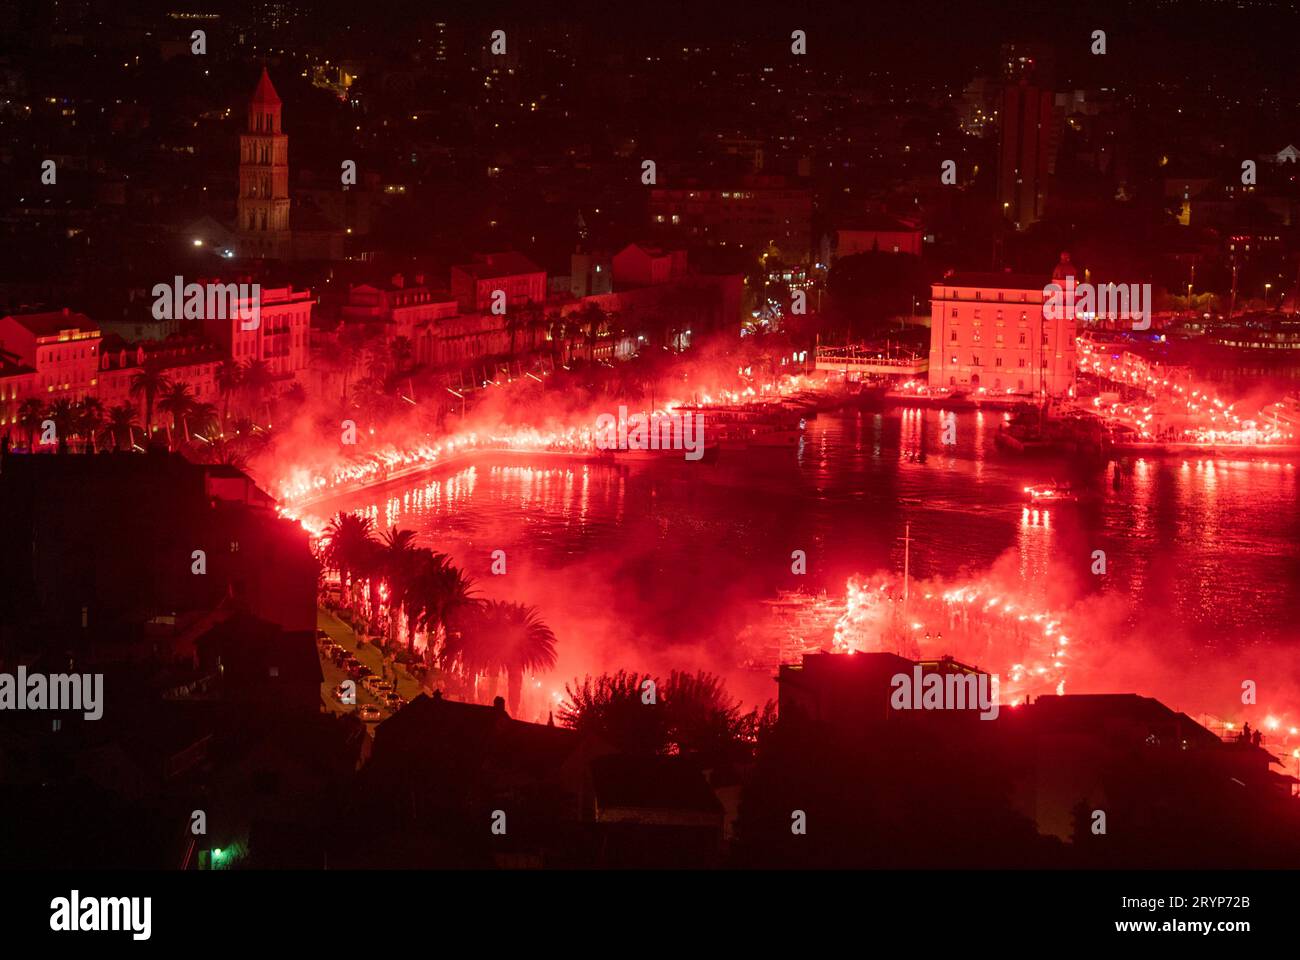 Croatia, Split, 300923. On the occasion of the 100,000 members of the Nas Hajduk association and the day before the derby with Dinamo, Torcida lit 1,000 torches on the waterfront in Split. Foto: Paun Paunovic/CROPIX Split Croatia Copyright: xxPaunxPaunovicx torcida baklje2-300923 Credit: Imago/Alamy Live News Stock Photo